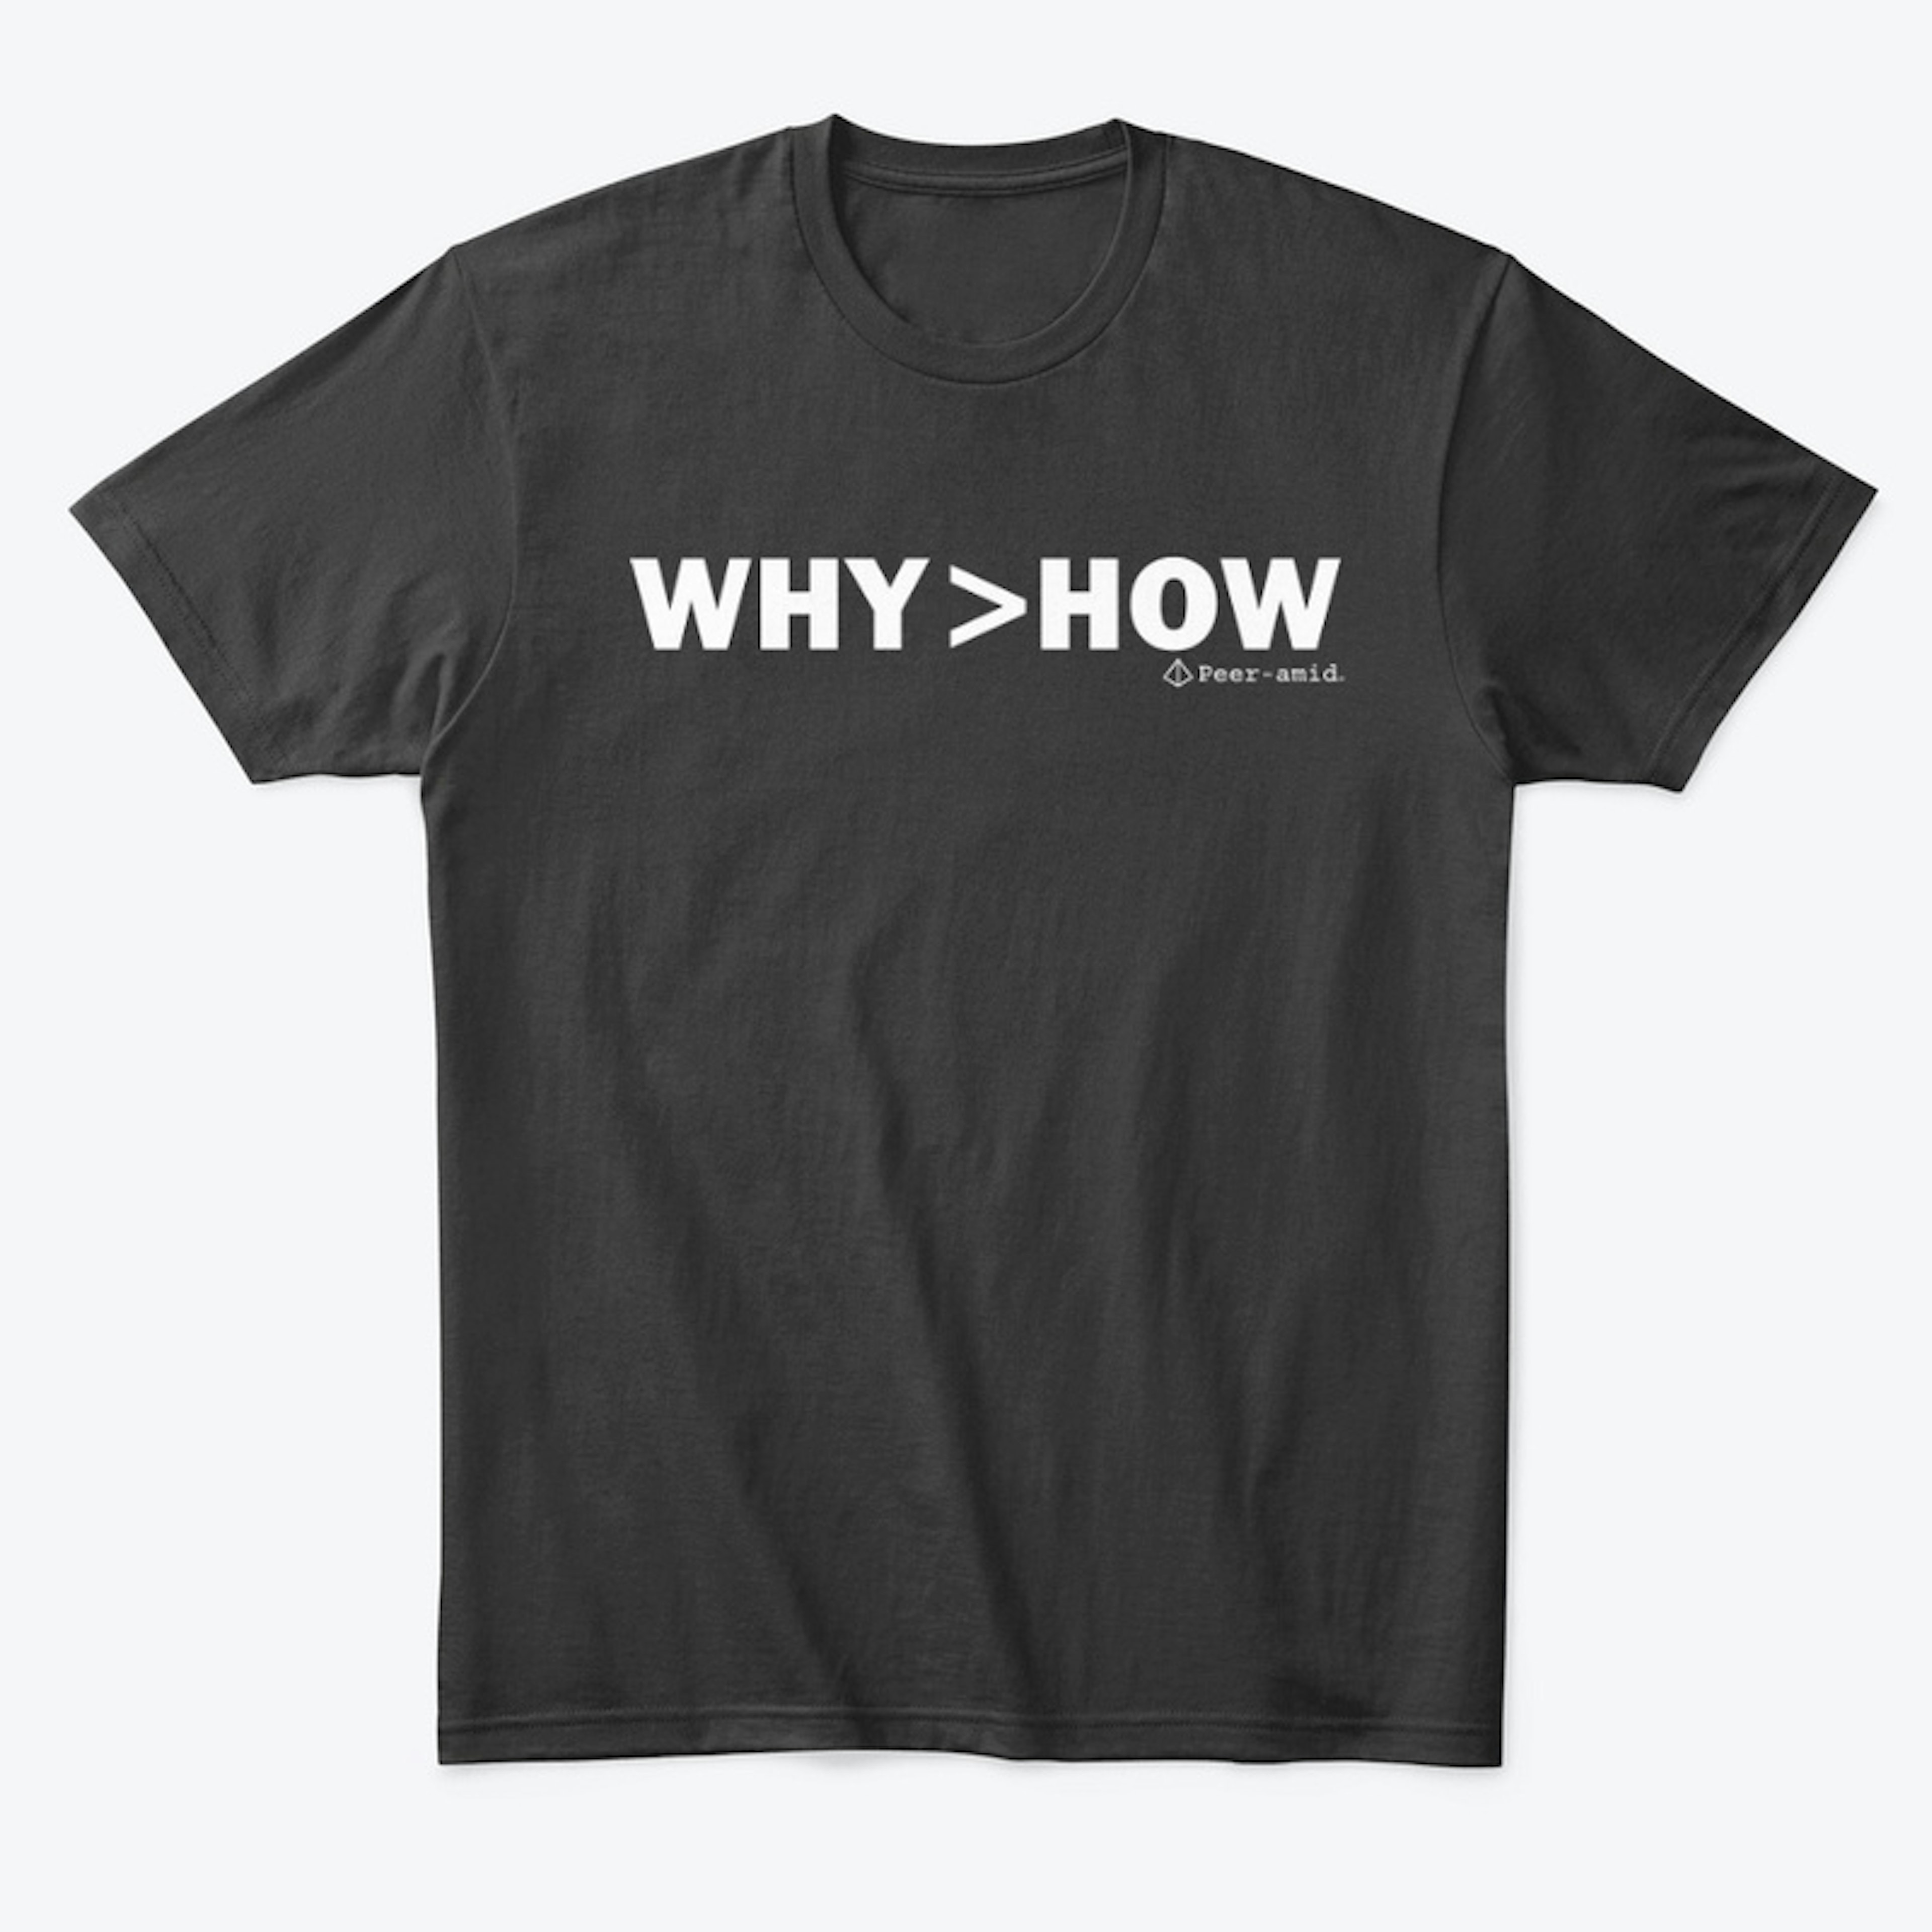 WHY IS GREATER THAN HOW (LARGE PRINT)